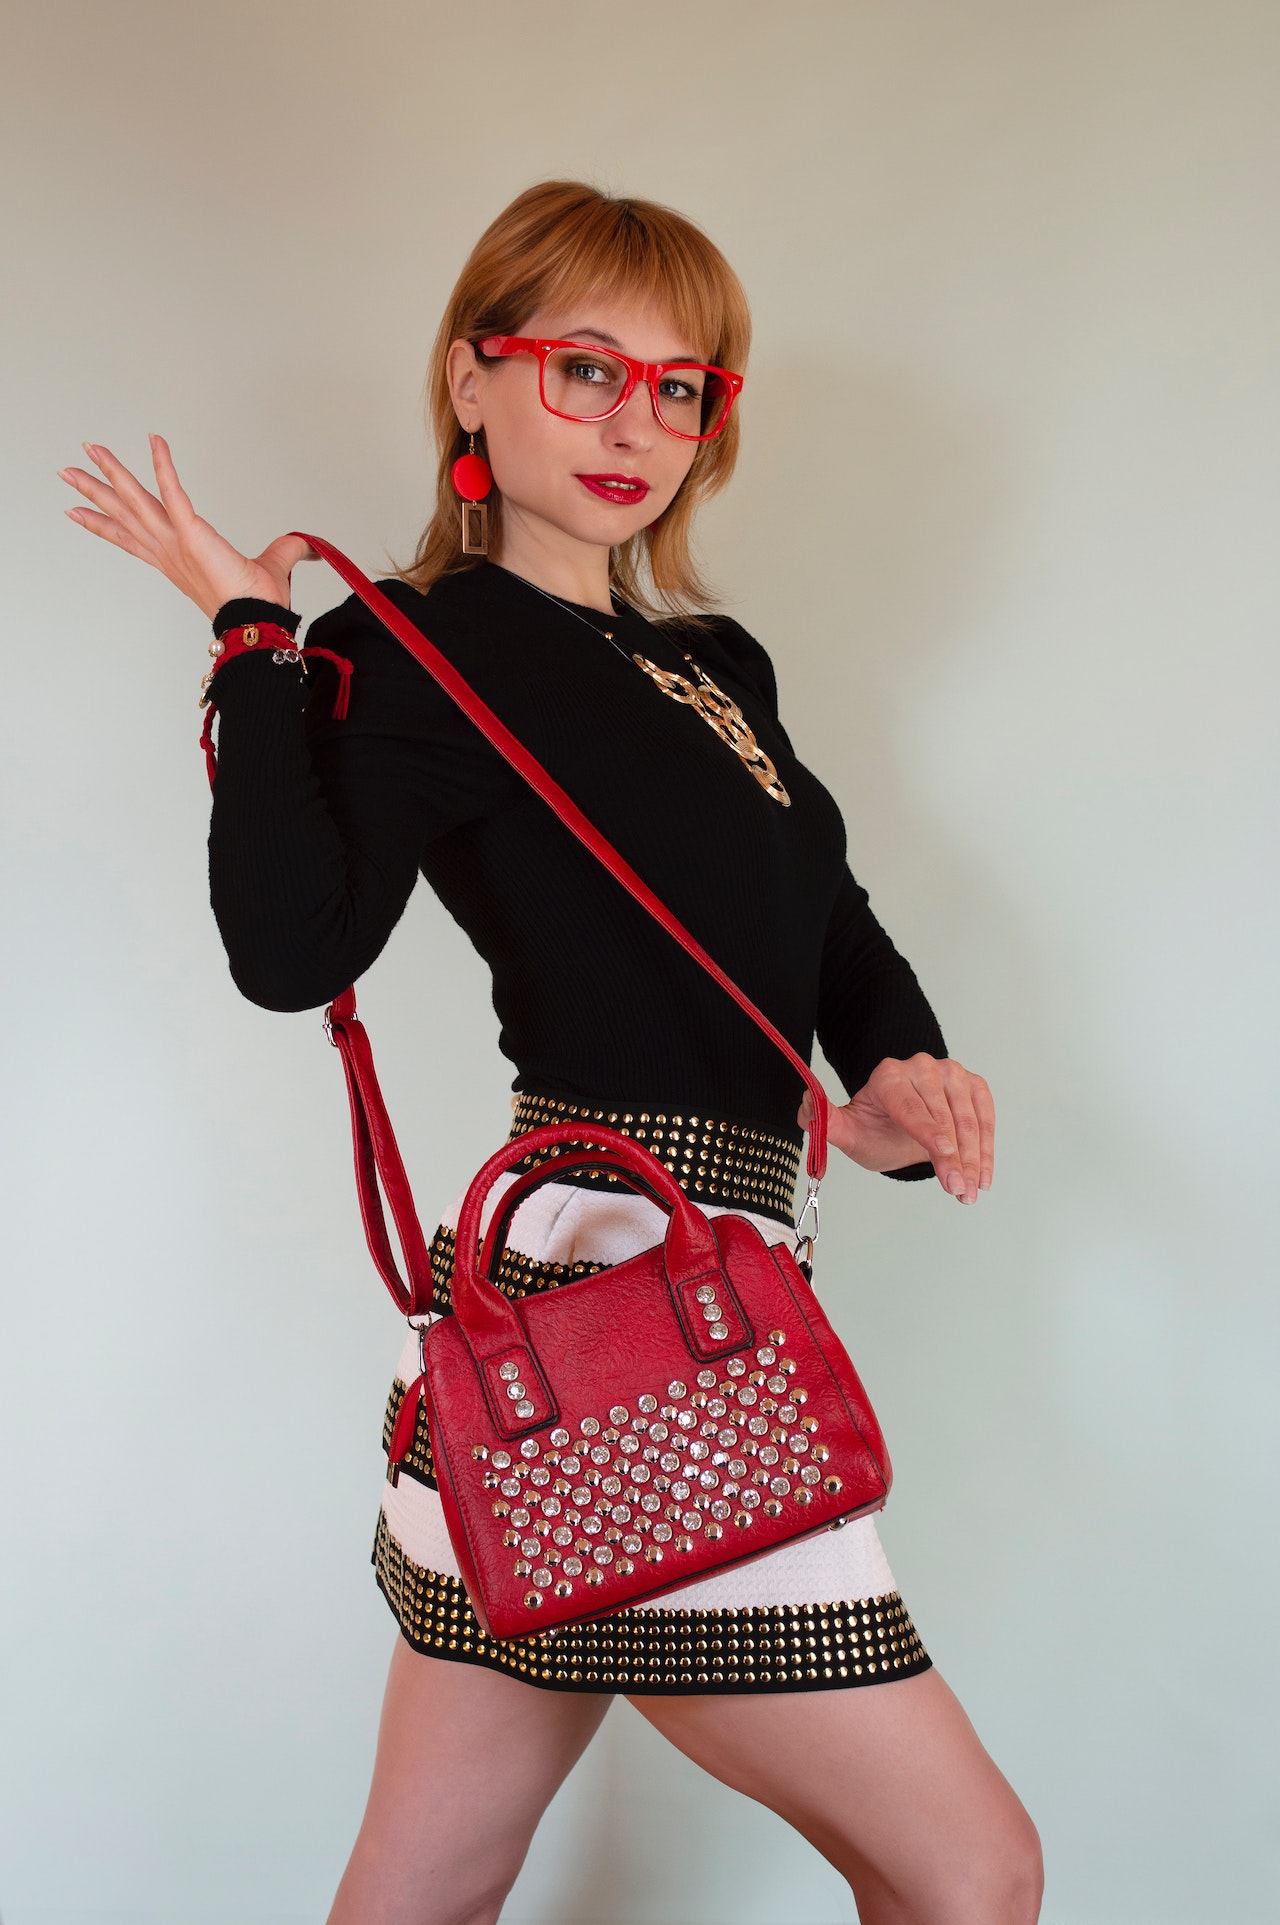 How to Style a Red Designer Bag?